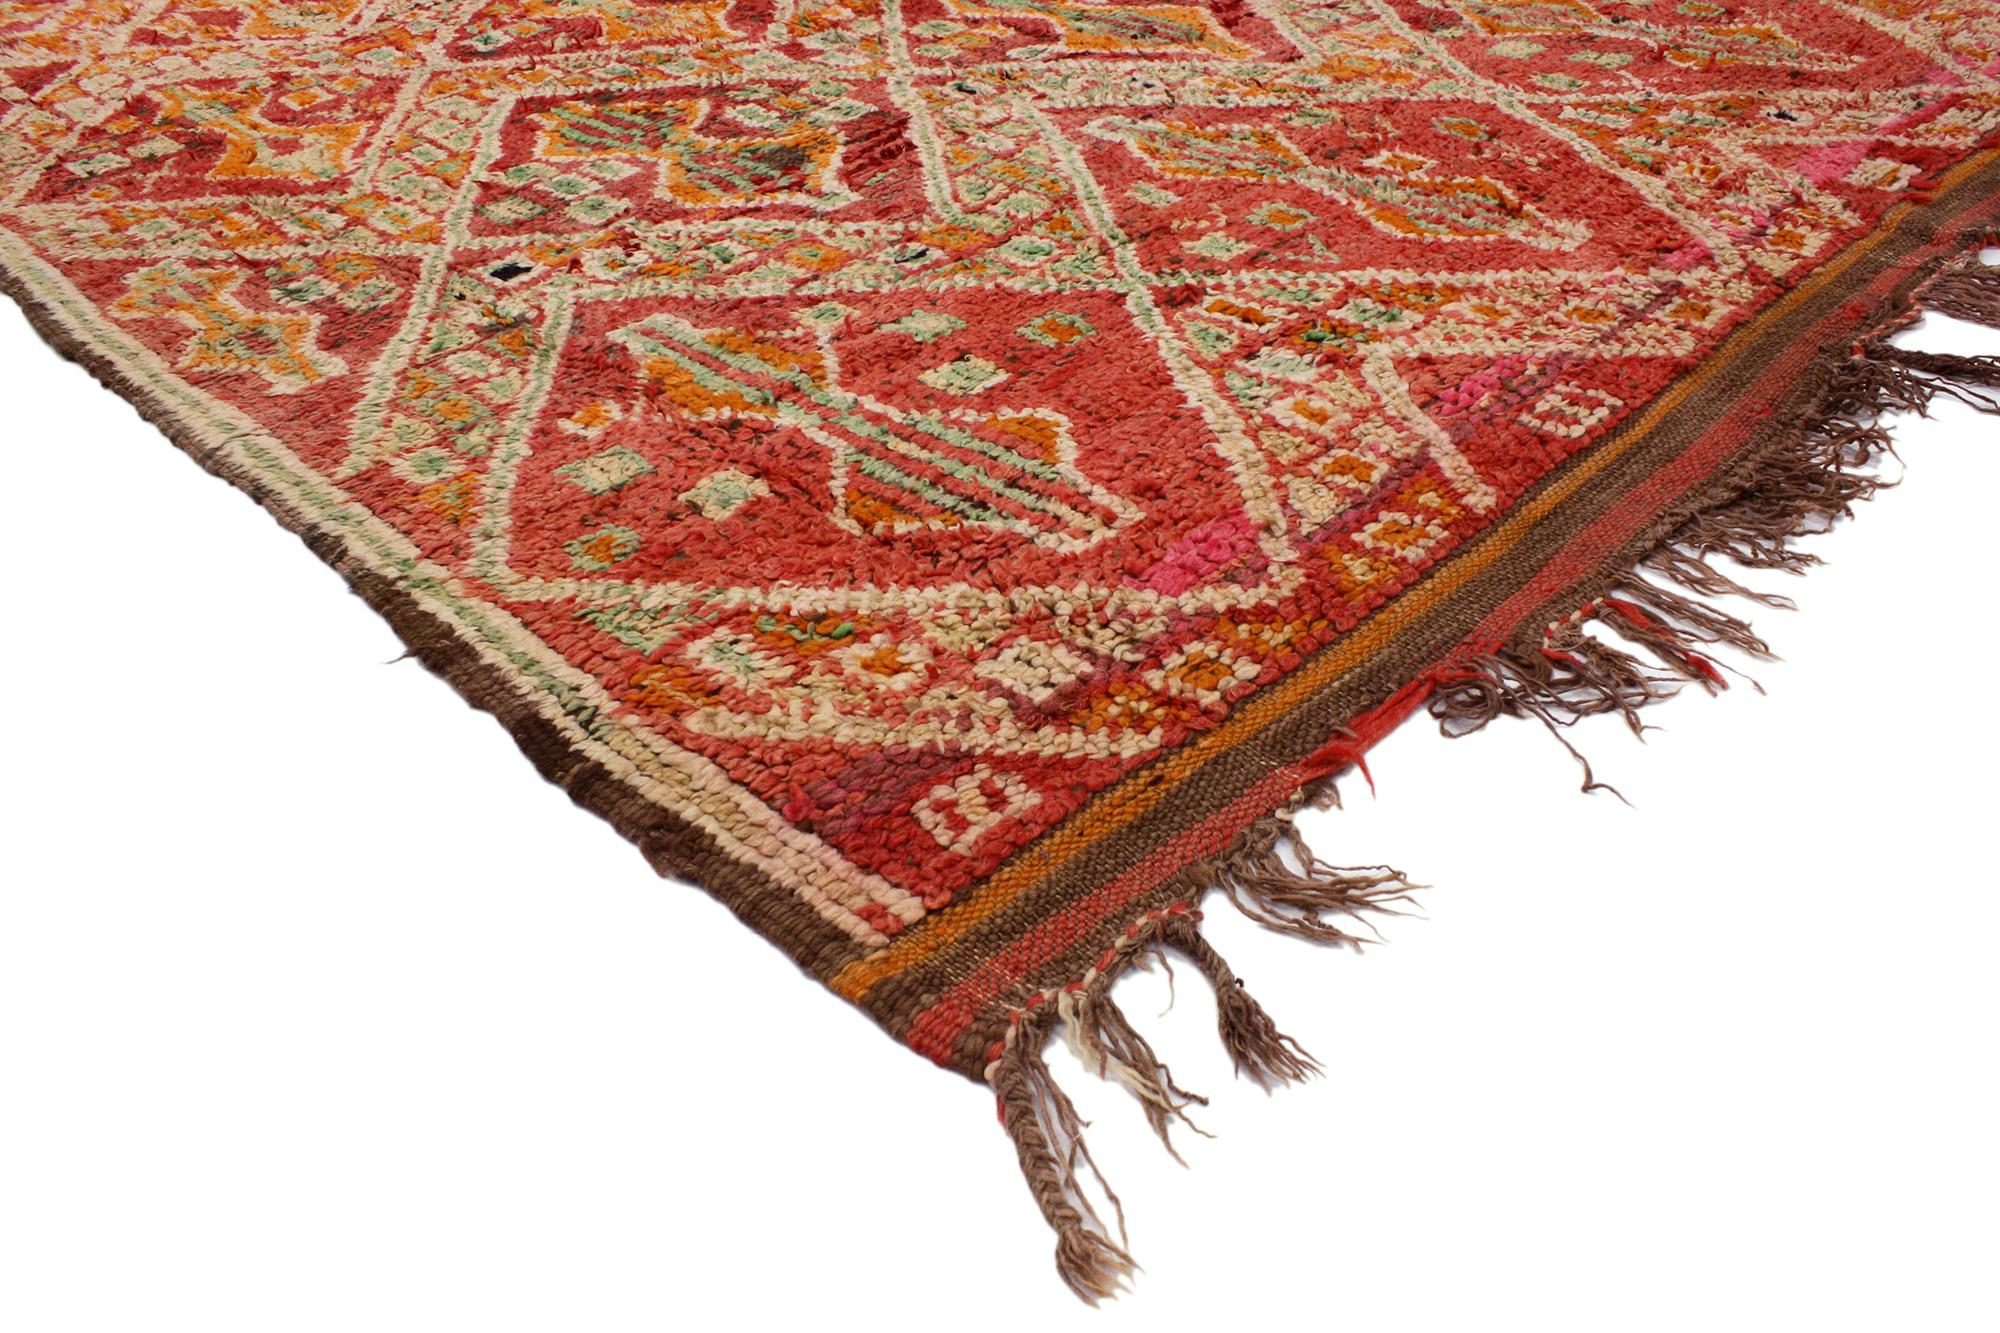 20262 Vintage Red Beni MGuild Moroccan Rug, 05'11 x 08'04. Beni M'Guild rugs, originating from the Beni M'Guild tribe nestled in the Middle Atlas Mountains of Morocco, represent a cherished tradition deeply ingrained in Berber culture. Crafted by